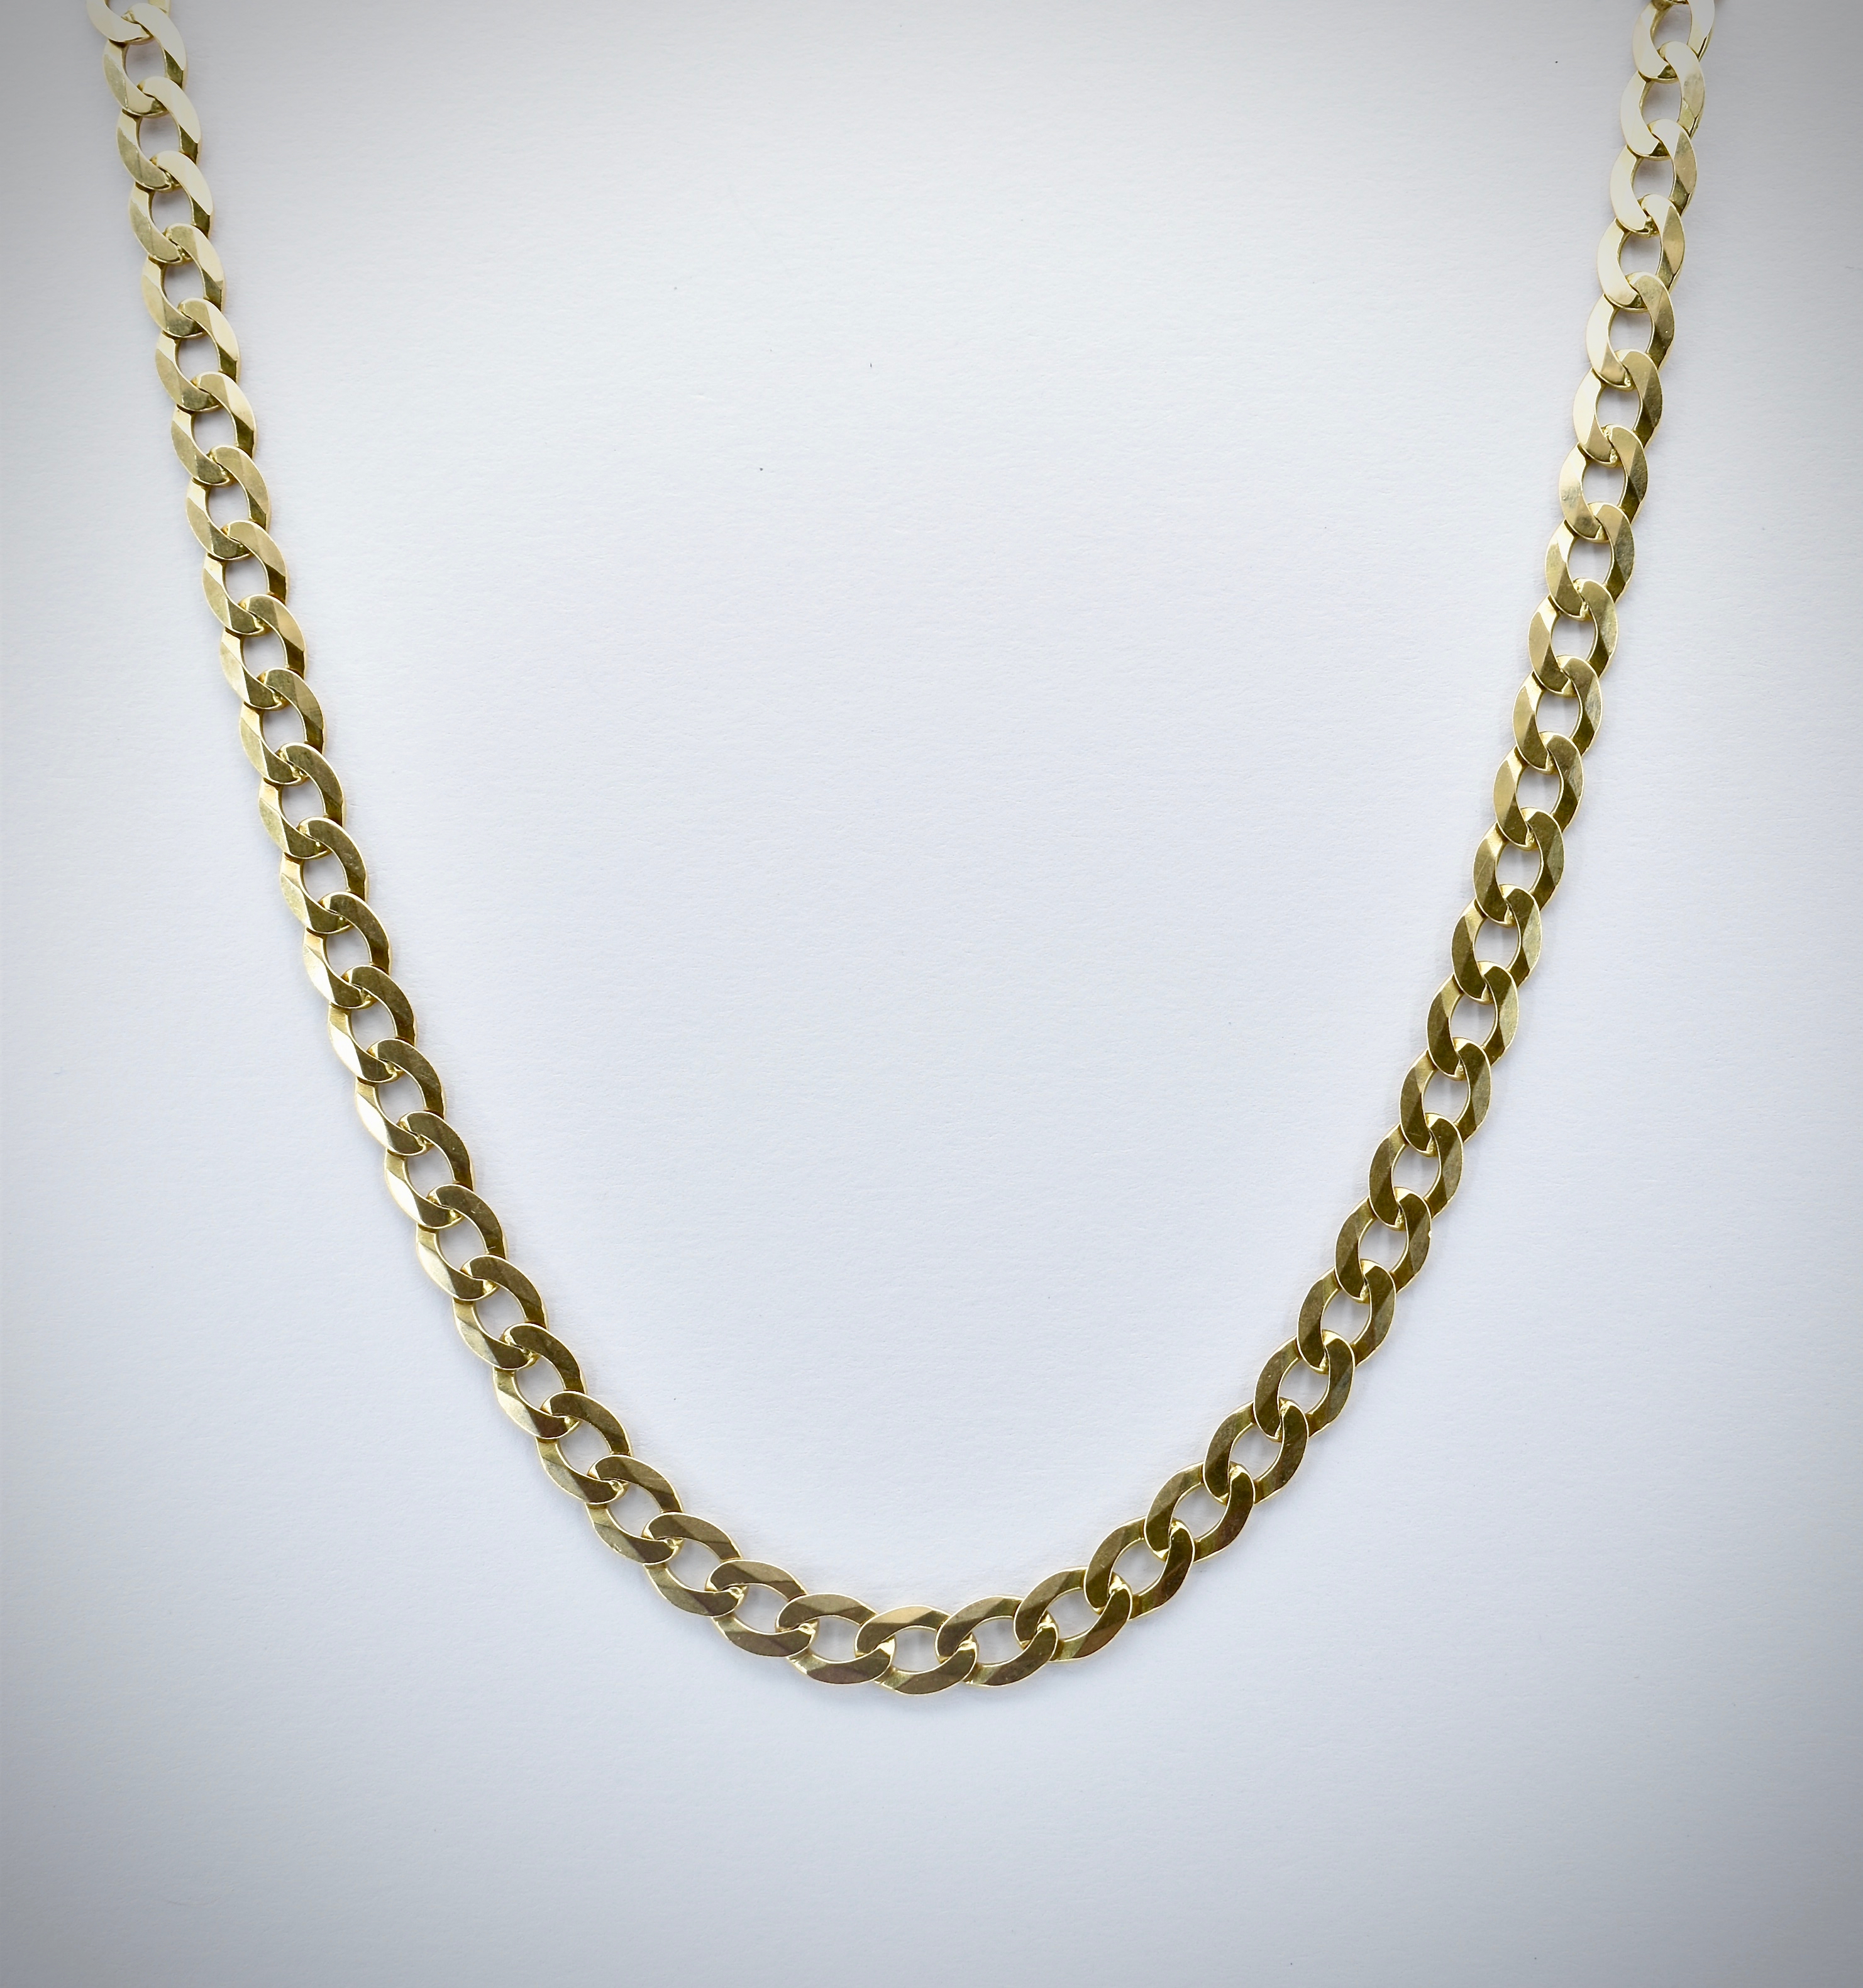 Hallmarked 9ct Gold Curb Chain Necklace - Image 2 of 3